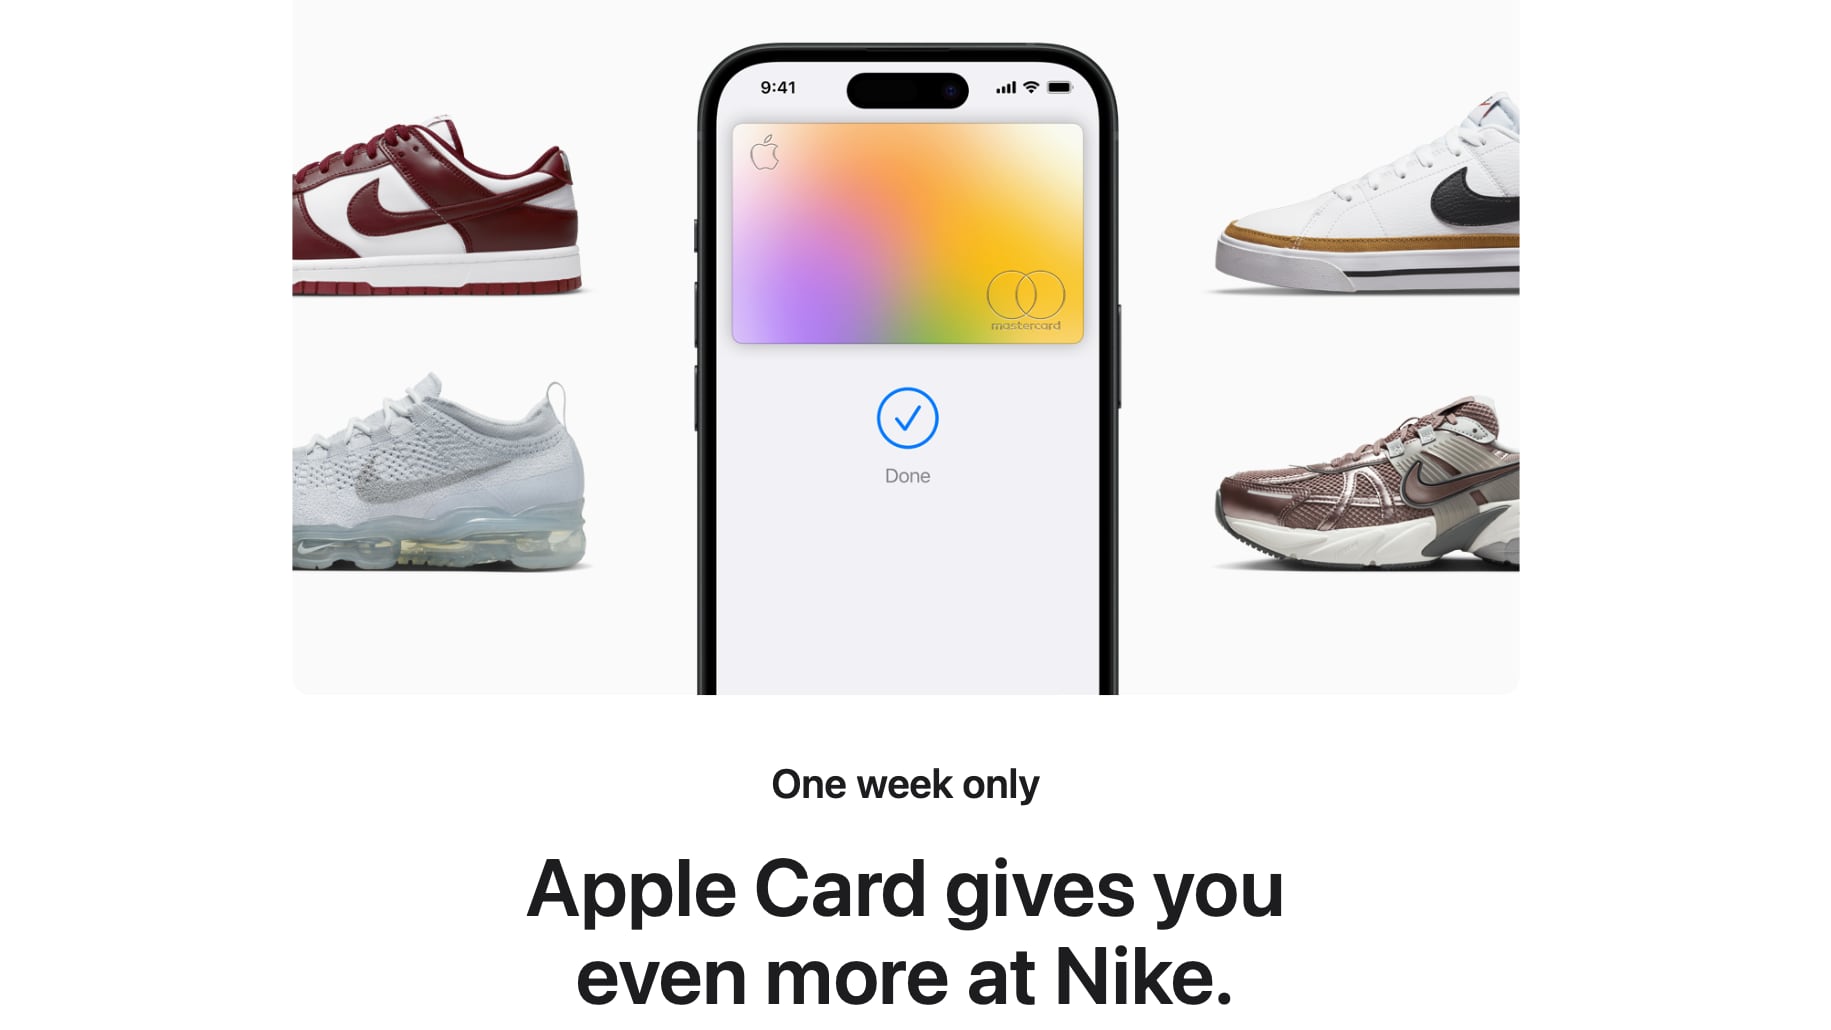 photo of Apple Card Promo Offers 10% Daily Cash at Nike image